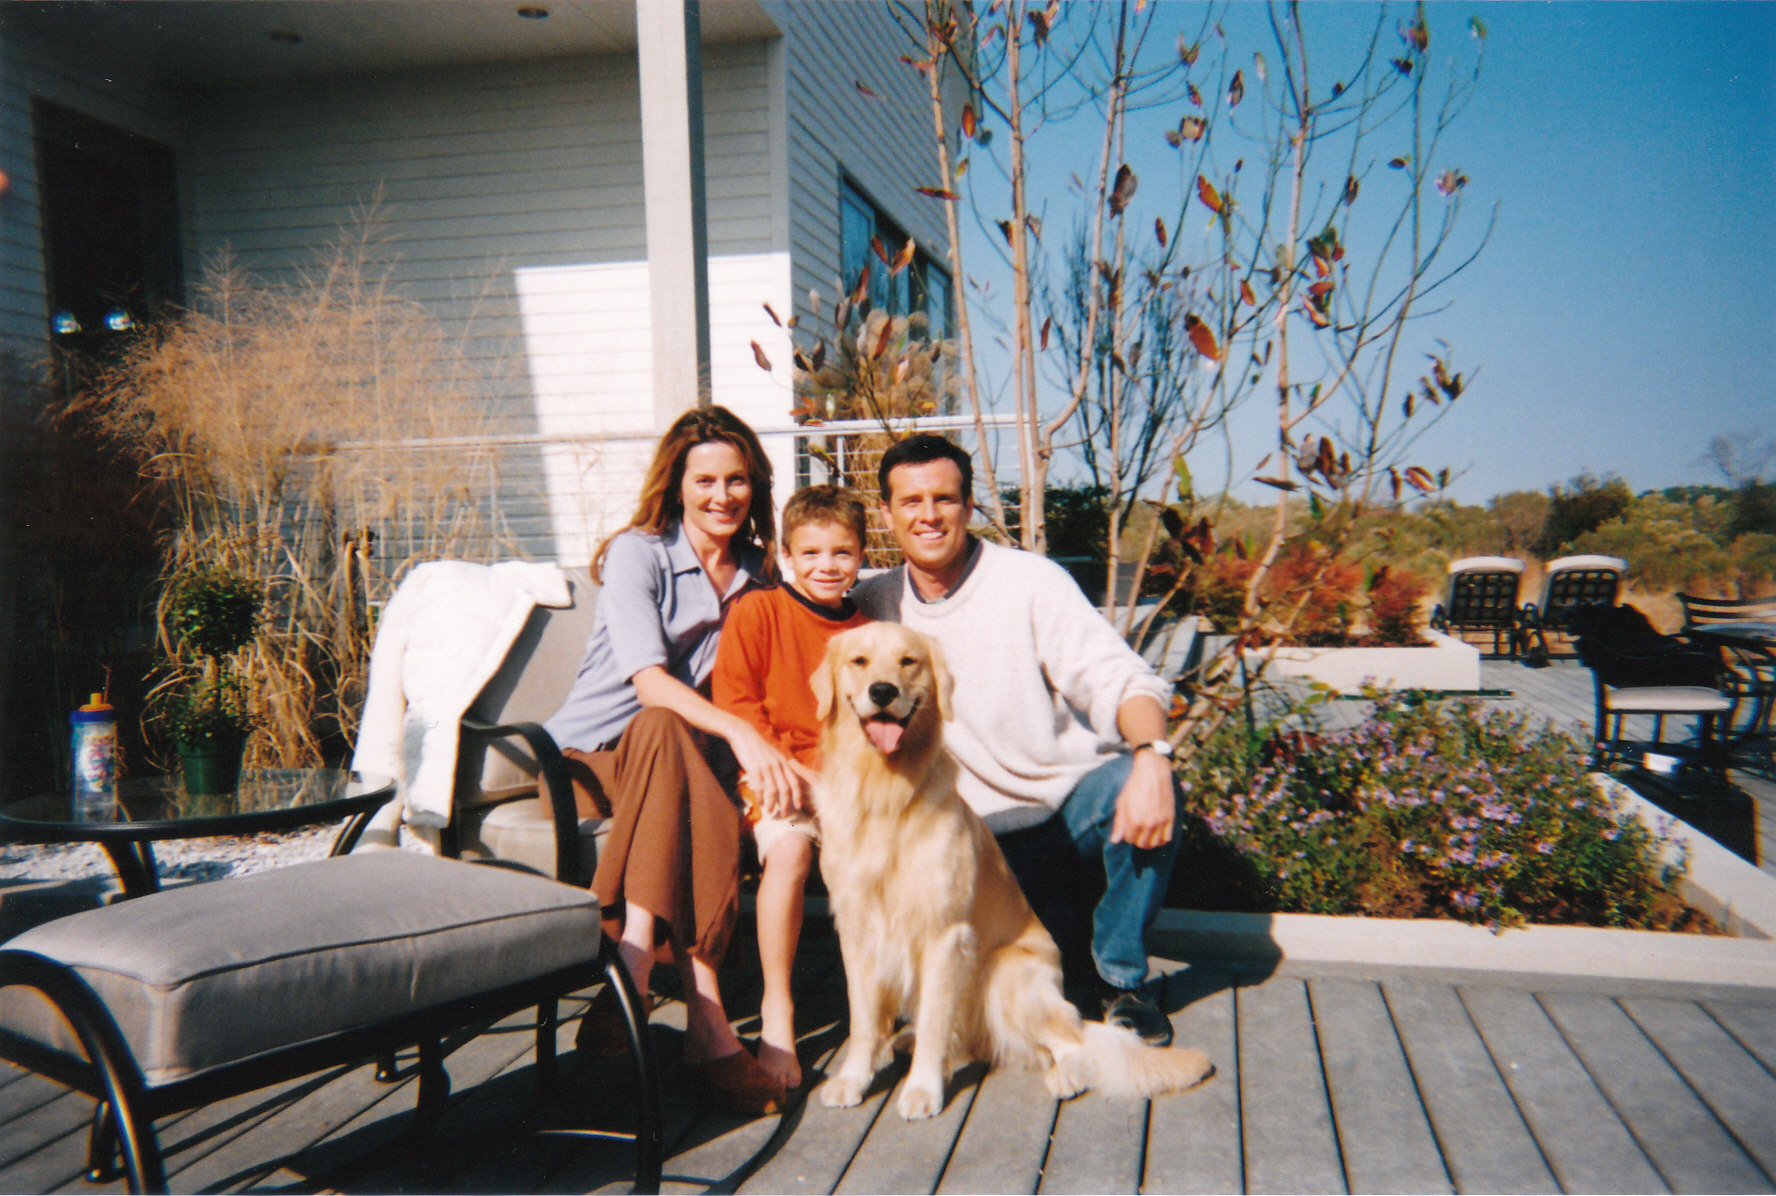 Scott, as the husband, with his TV family for the 2002 HGTV DREAM HOME SWEEPSTAKES GIVEWAY commercial in Maryland.